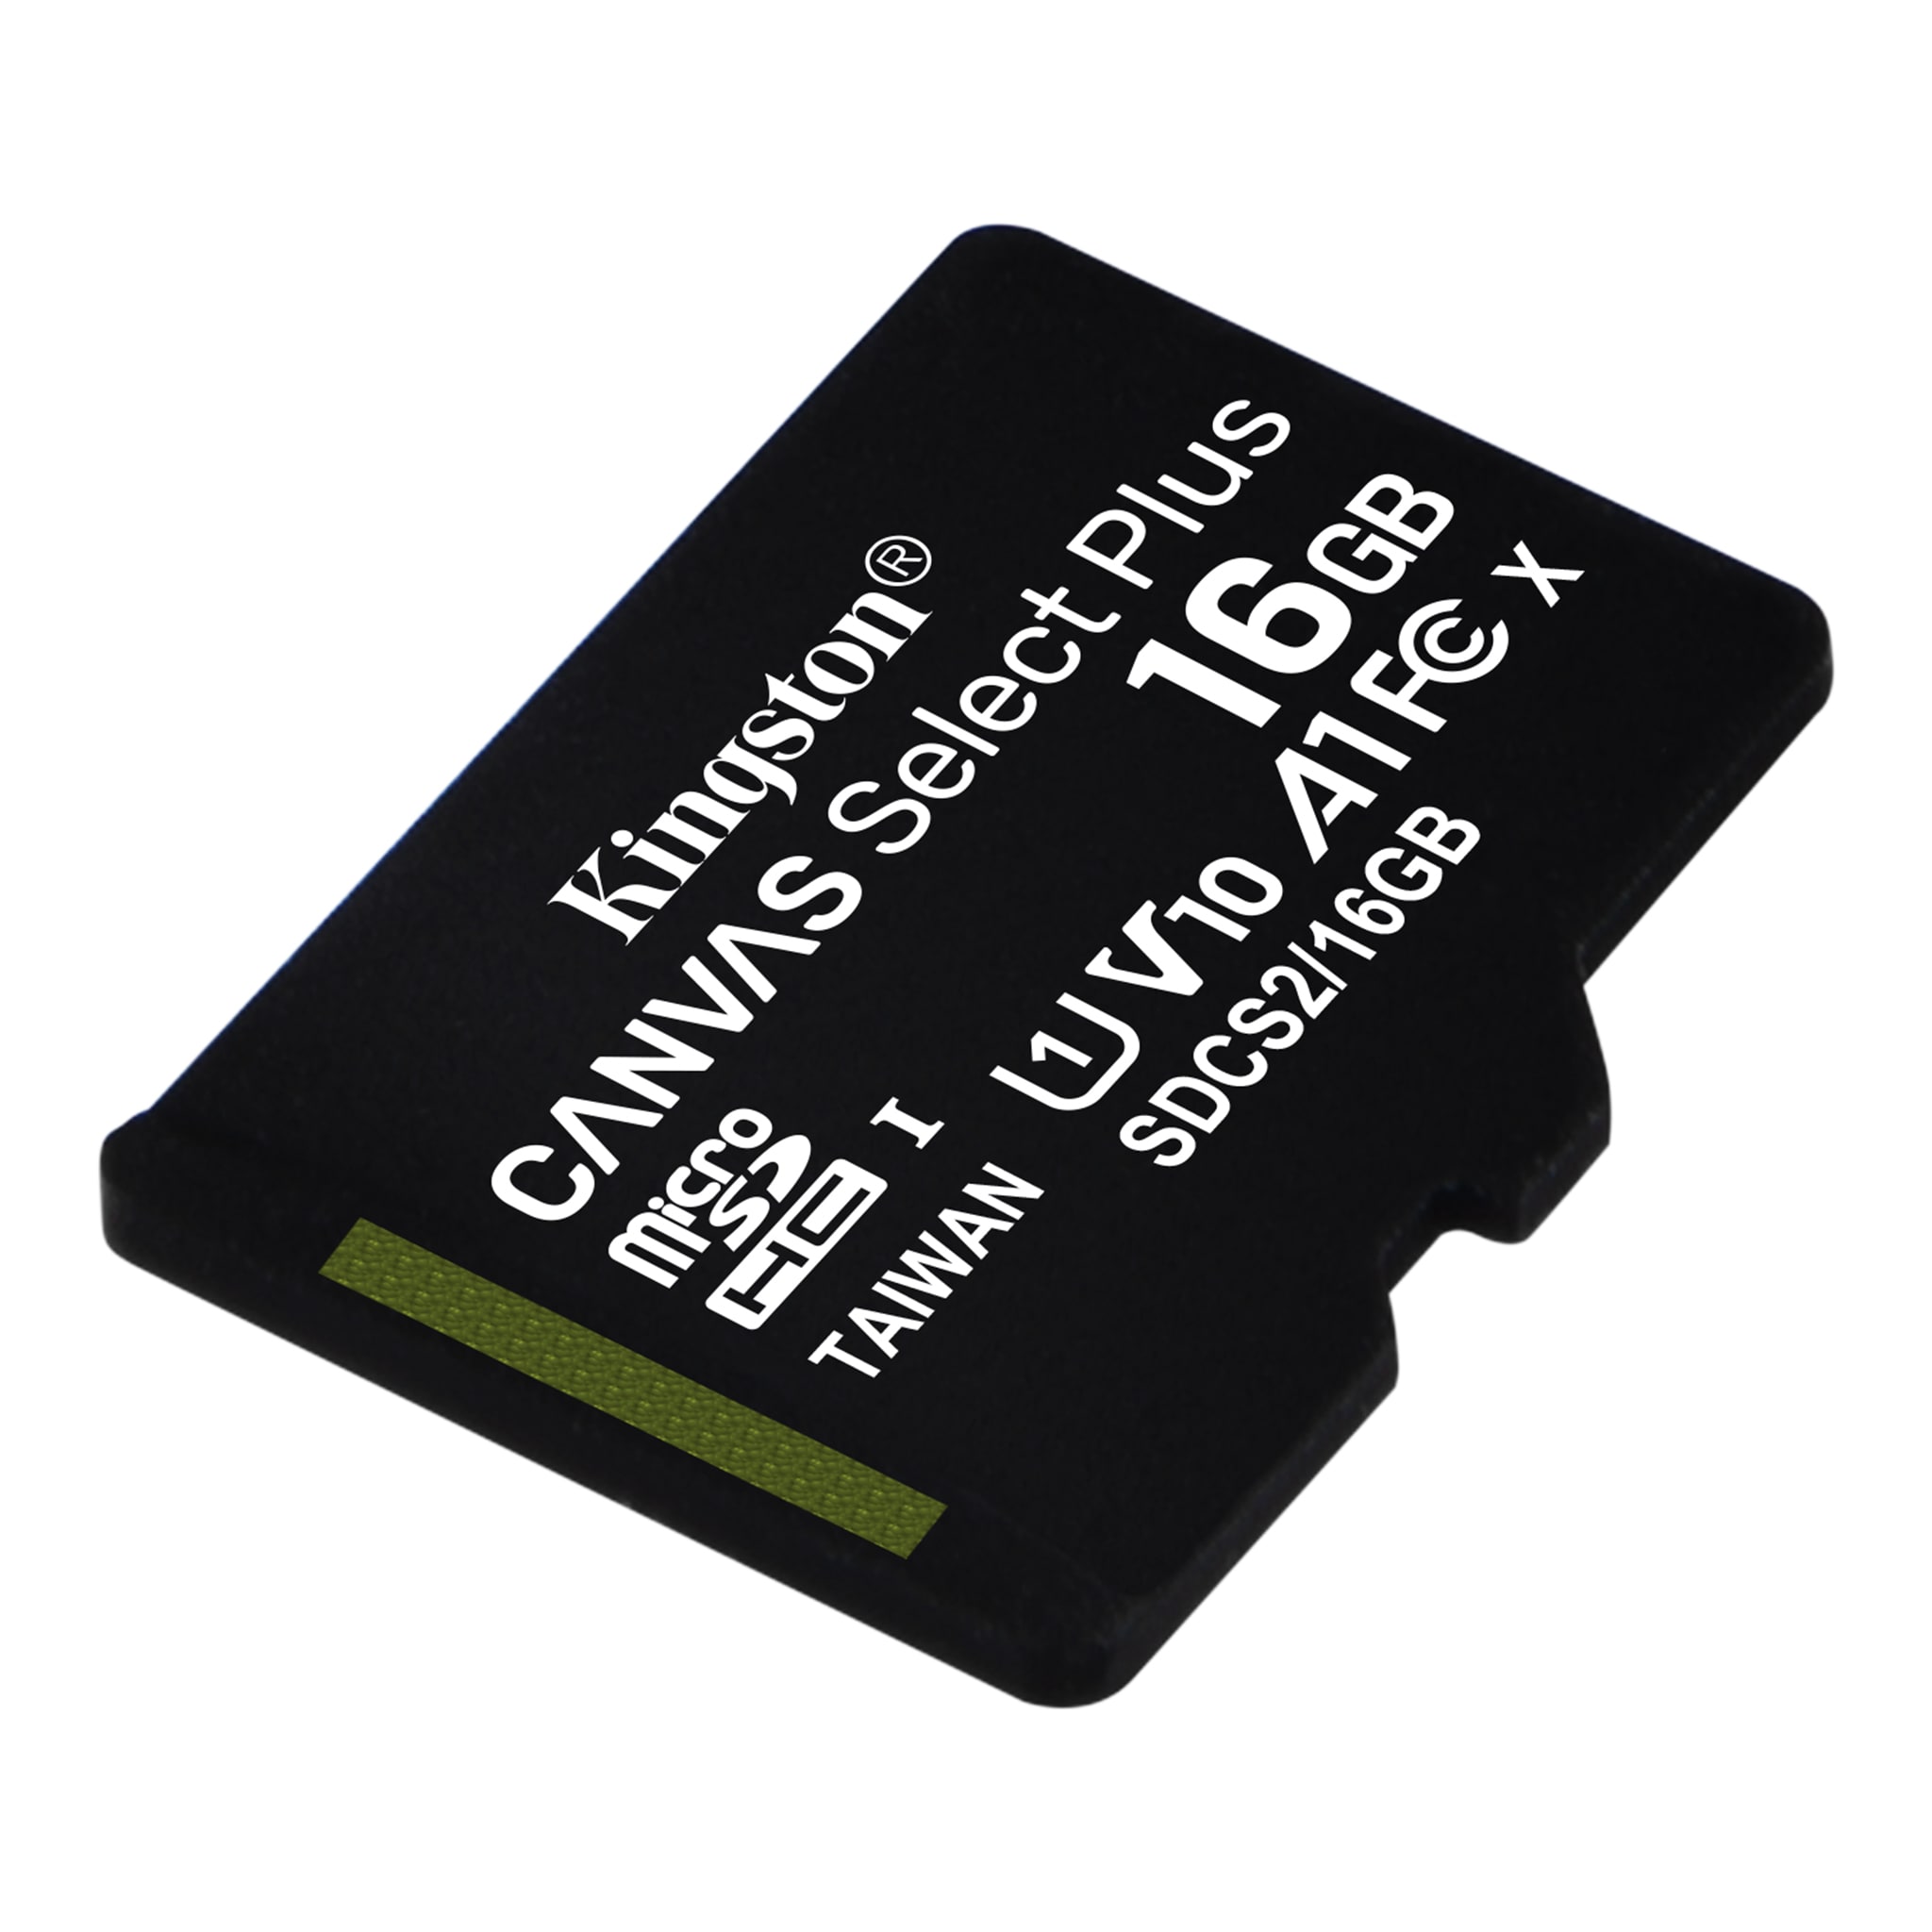 100MBs Works with Kingston Kingston 128GB Samsung Galaxy A9 2018 MicroSDXC Canvas Select Plus Card Verified by SanFlash.